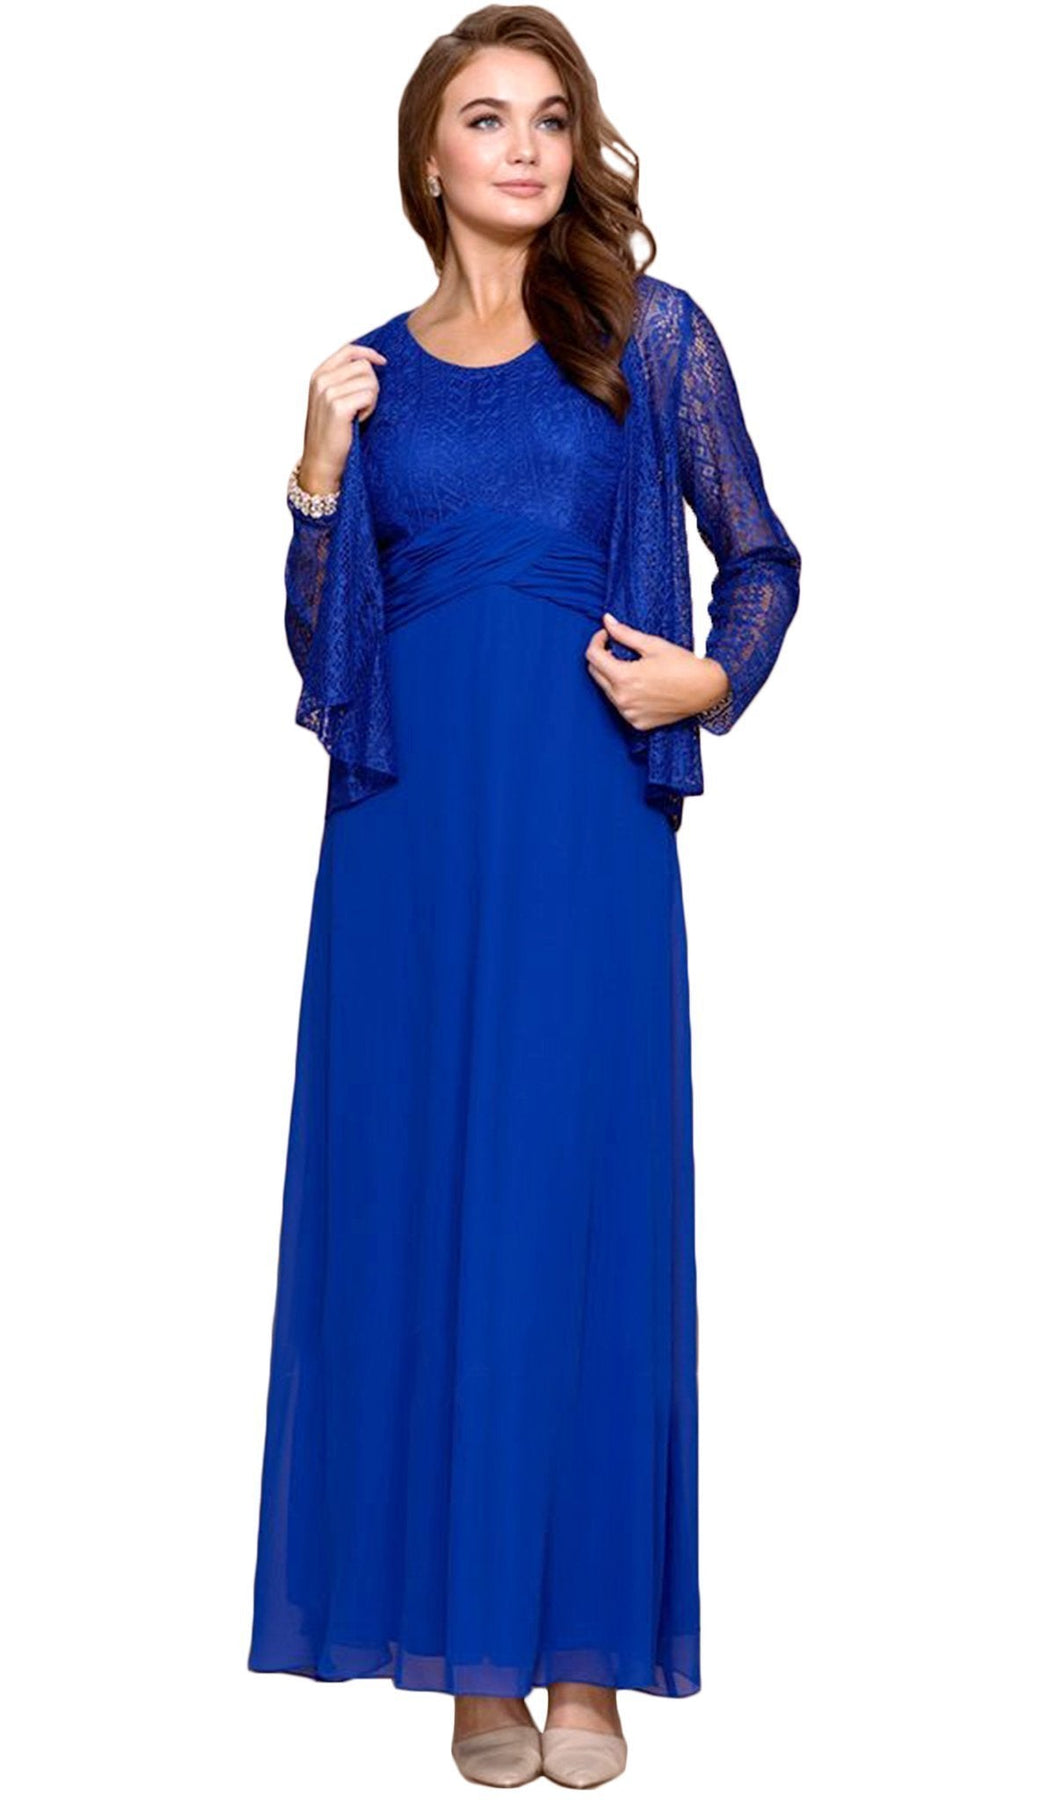 Nox Anabel - 5138 Lace Scoop Neck A-line Dress Special Occasion Dress M / Royal Blue